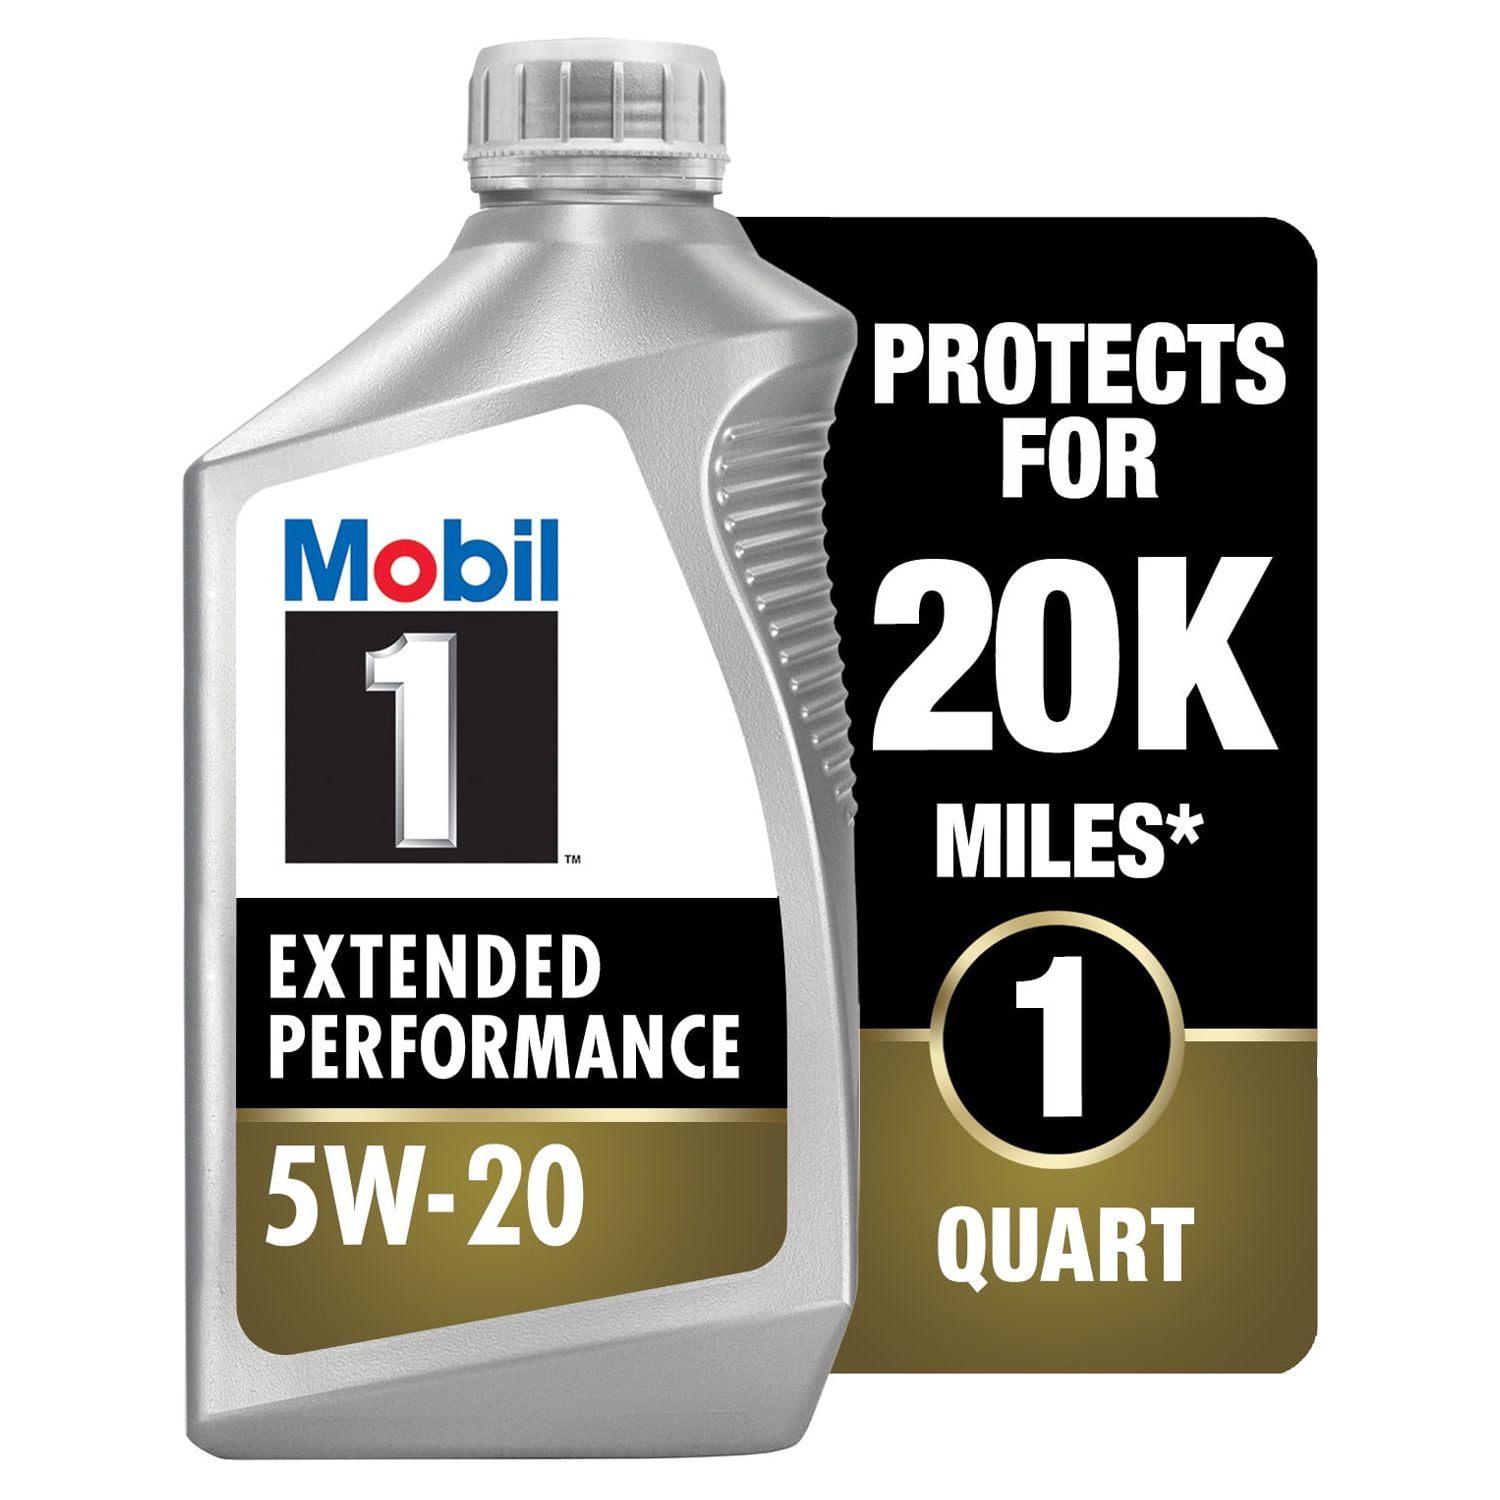 Mobil 1 Synthetic LV ATF HP 1 Quart Bottle Sold Individually